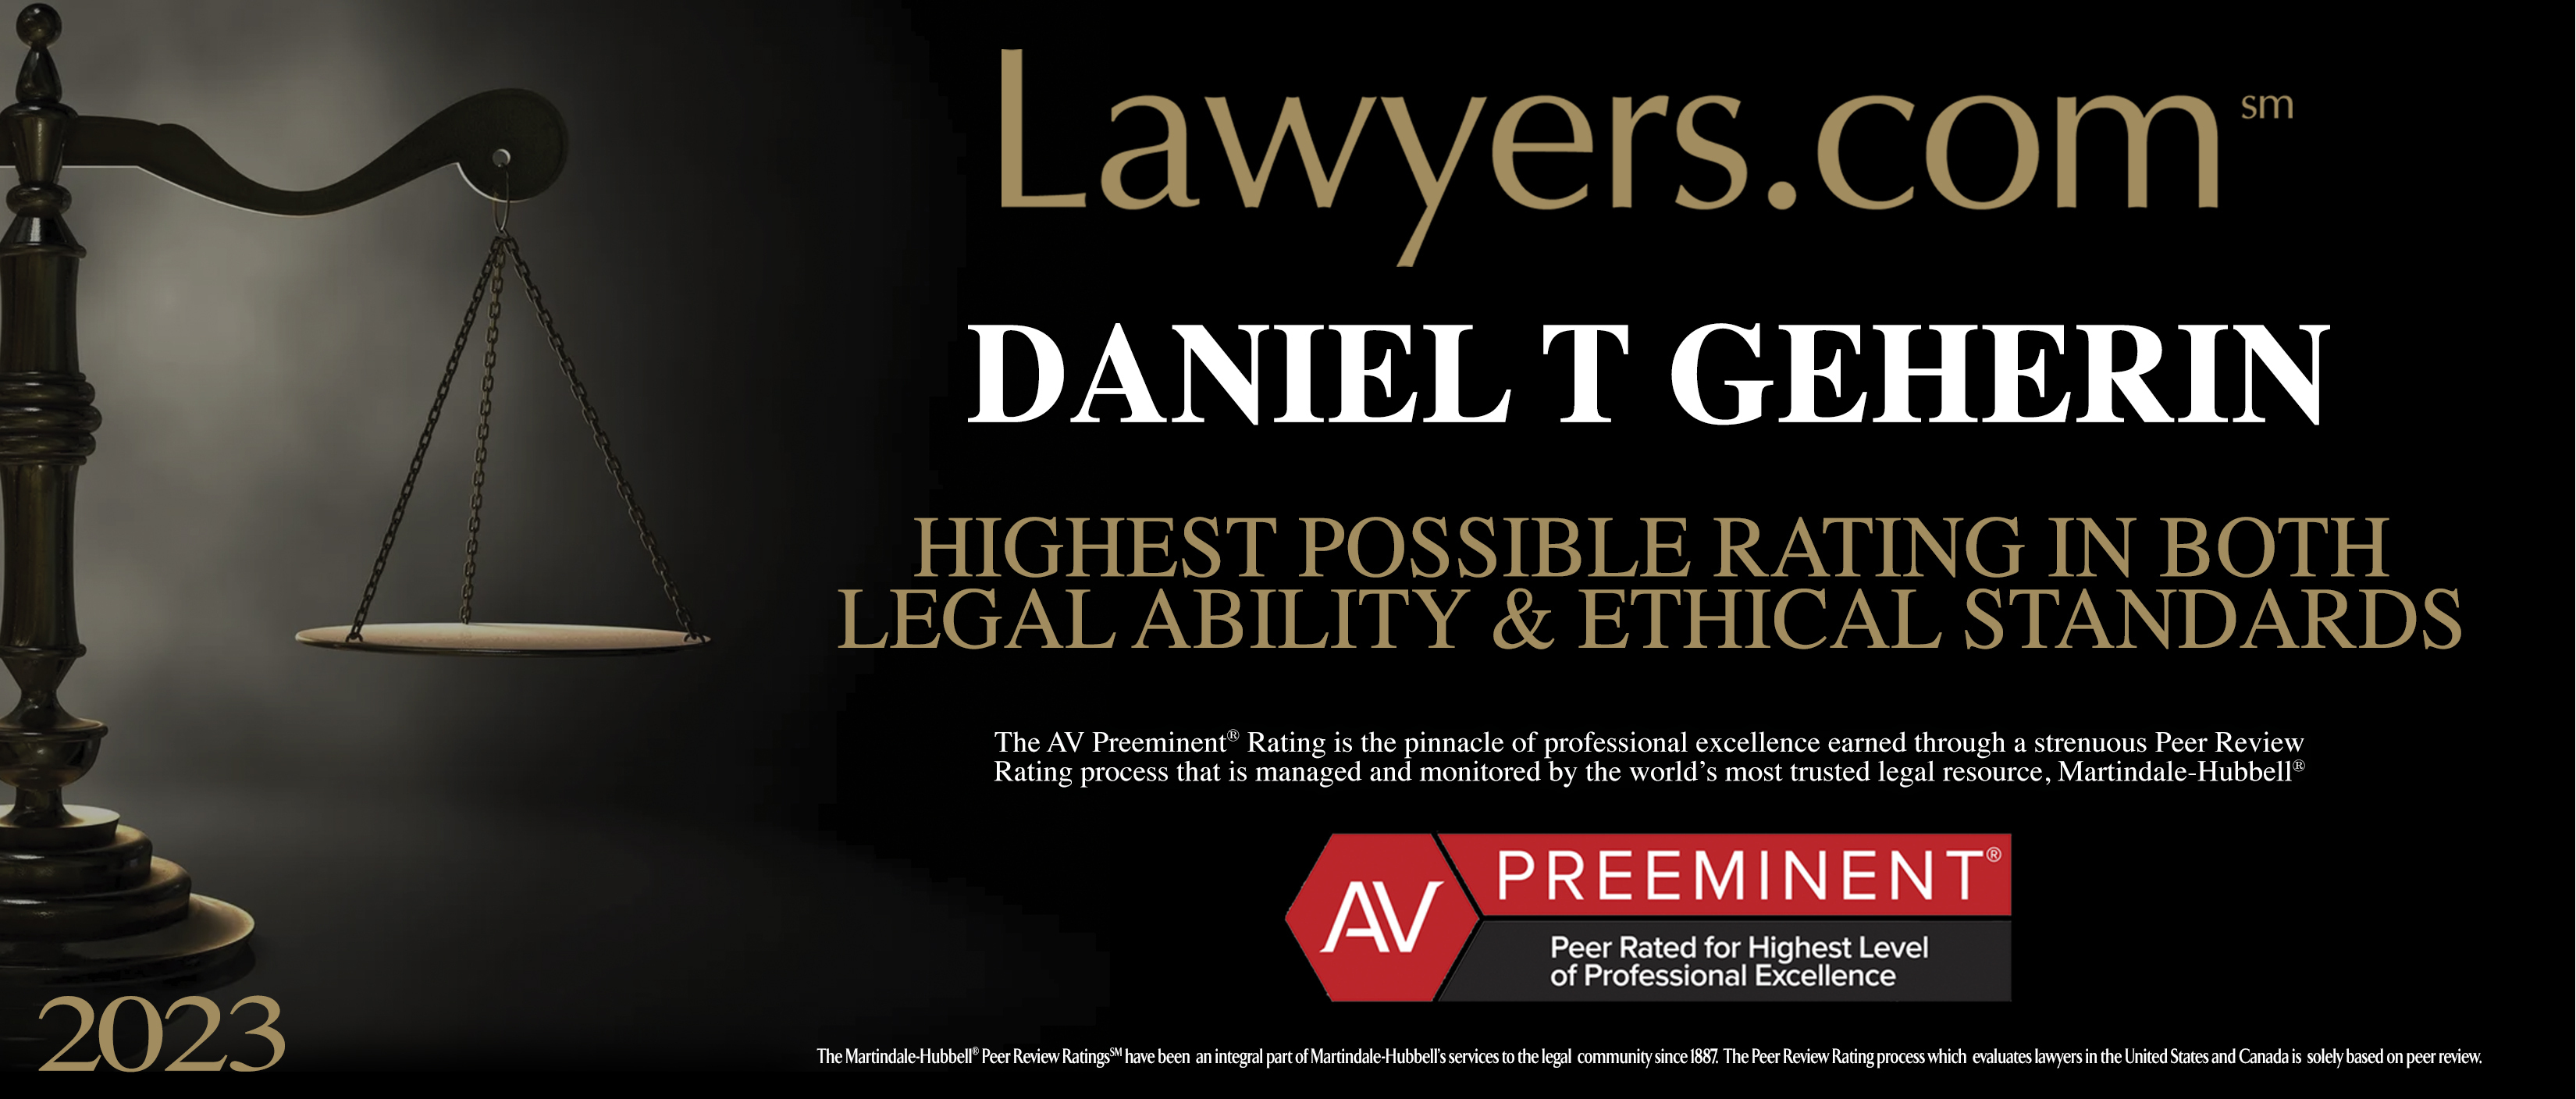 Daniel T. Geherin - Highest Possible Rating in Both Legal Ability & Ethical Standards